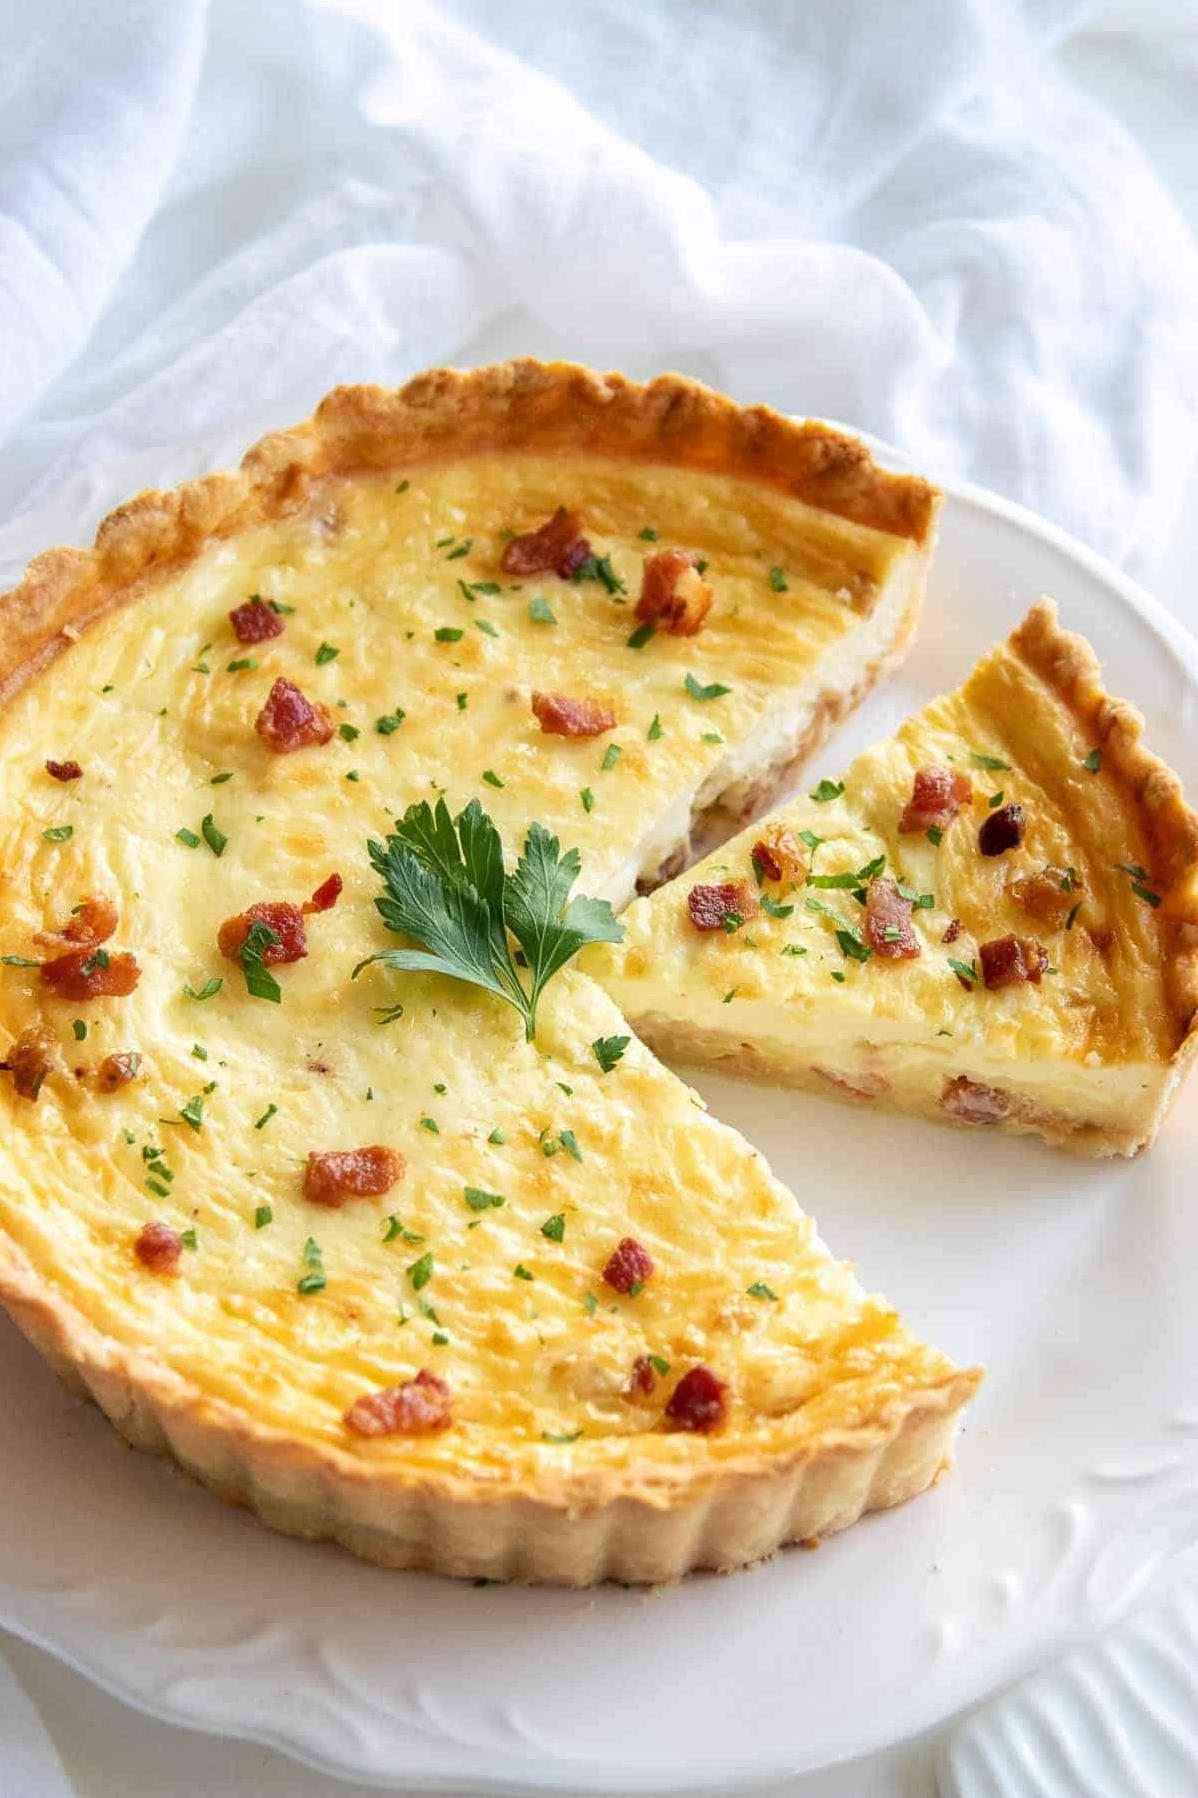  This quiche is giving us all the breakfast vibes.